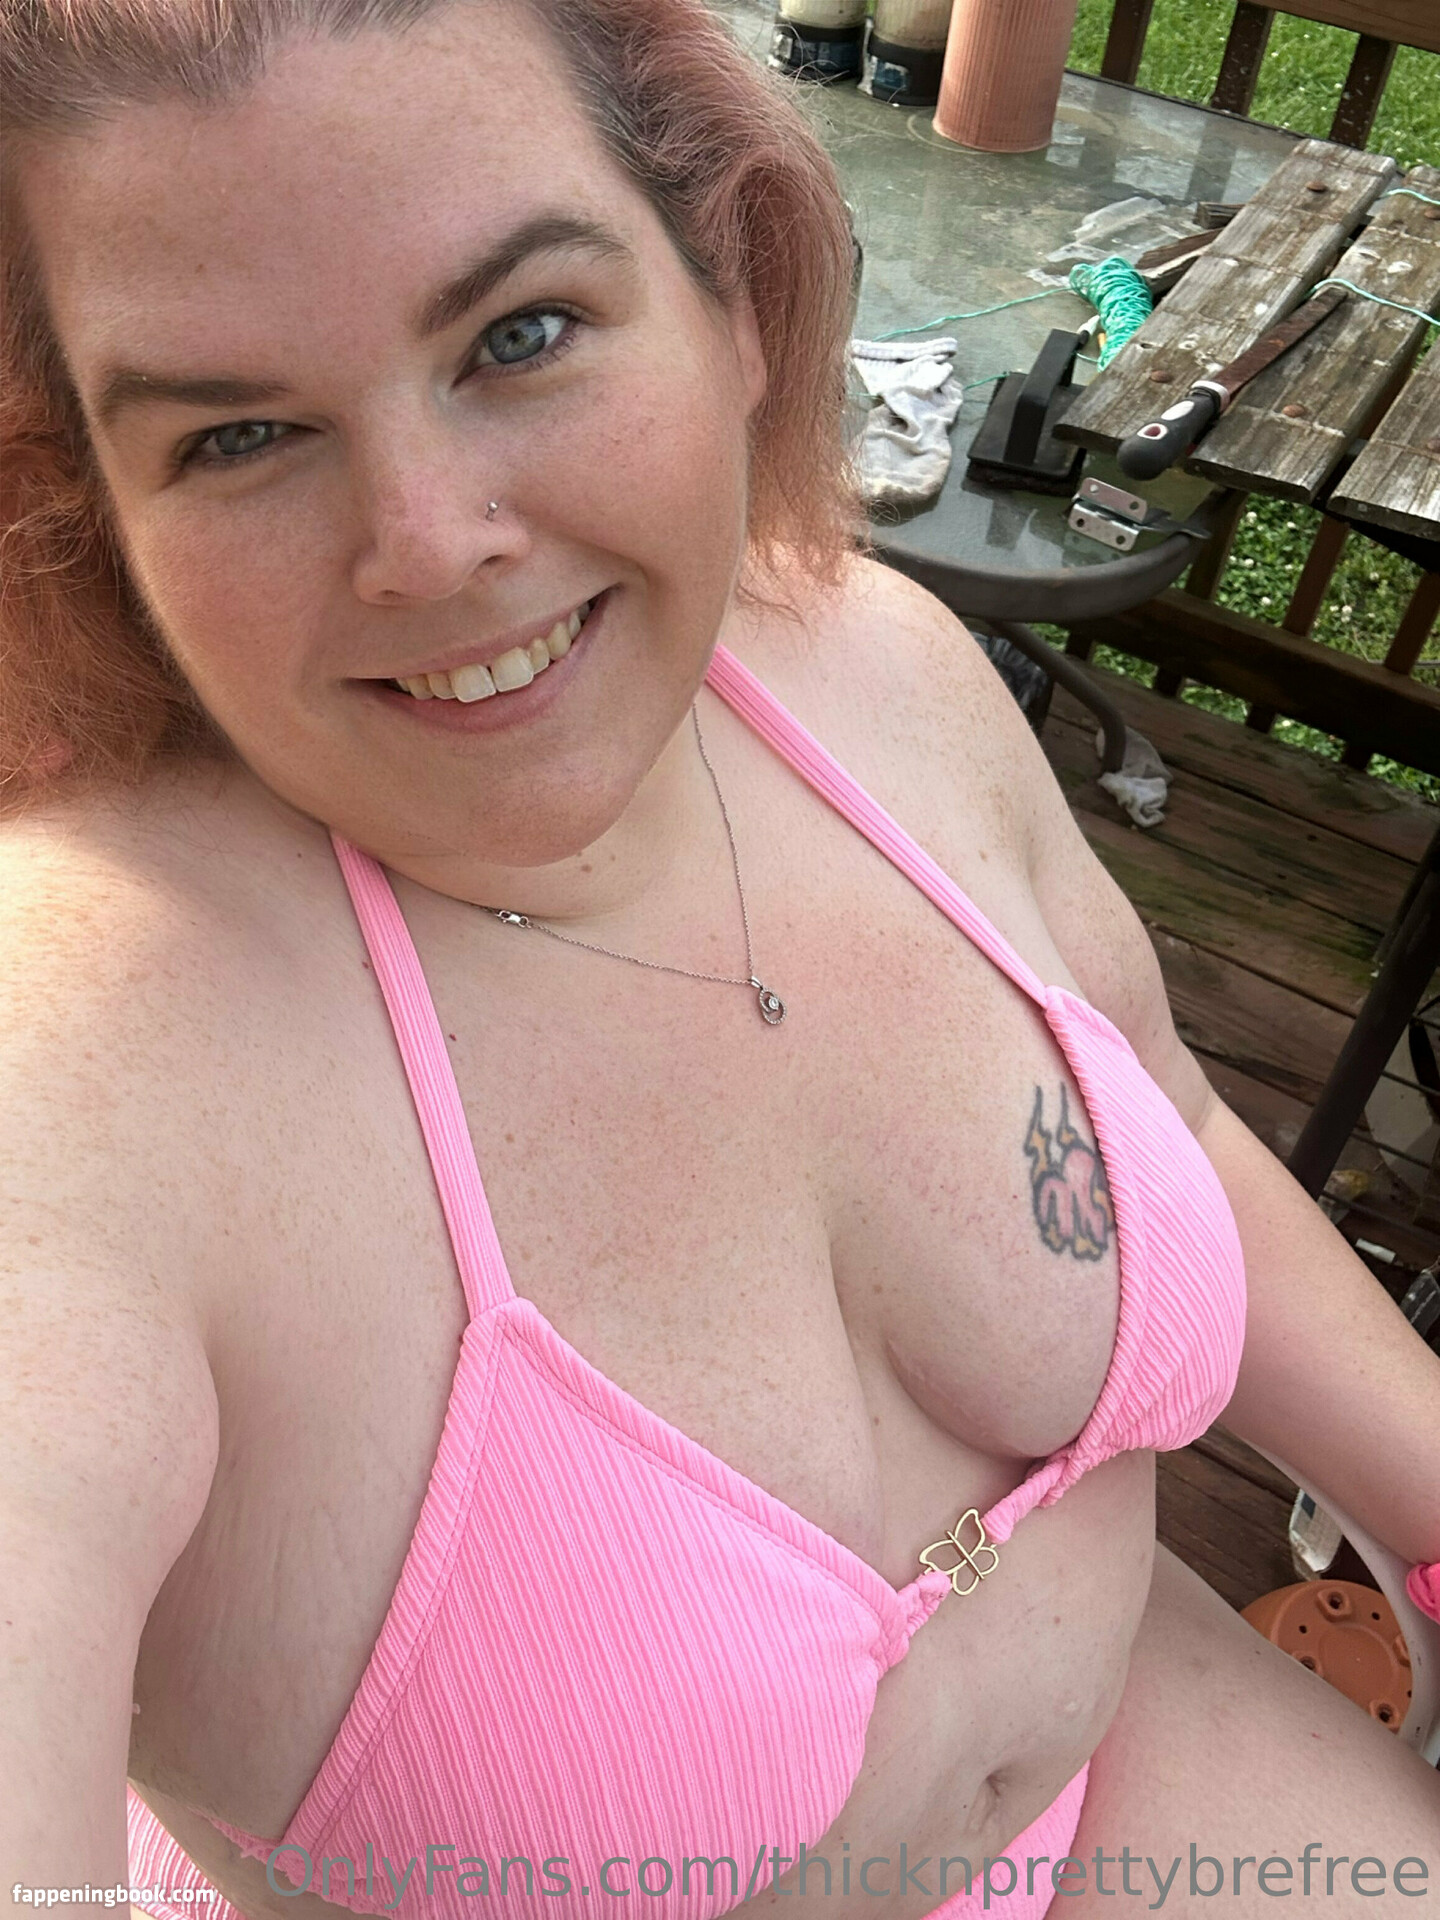 thicknprettybrefree Nude OnlyFans Leaks